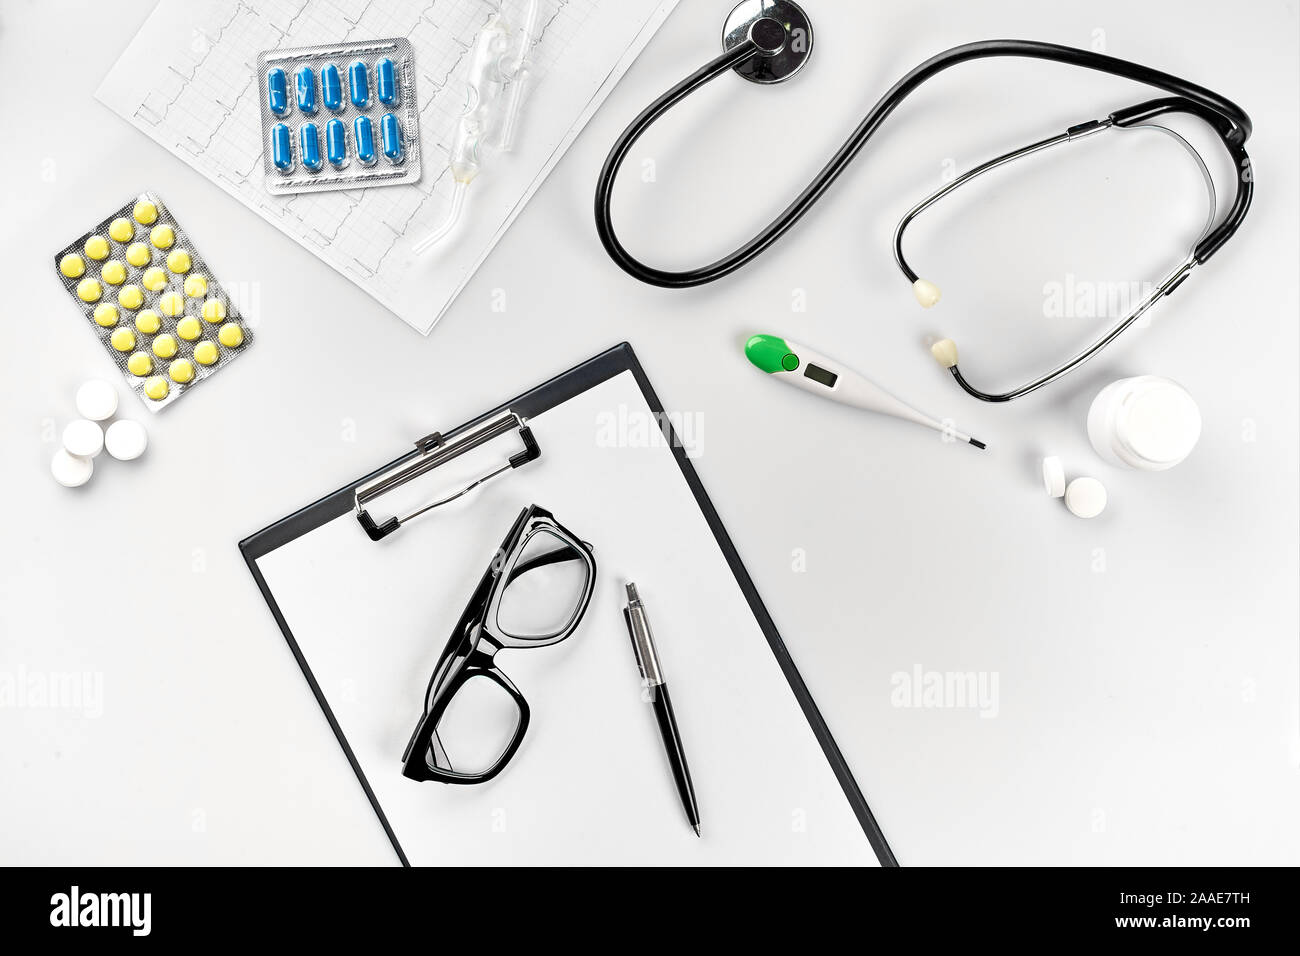 Business set for hospital: pills, stethoscope, medical equipment, note book with pen and glasses on white background. Modern doctor's set on the table Stock Photo